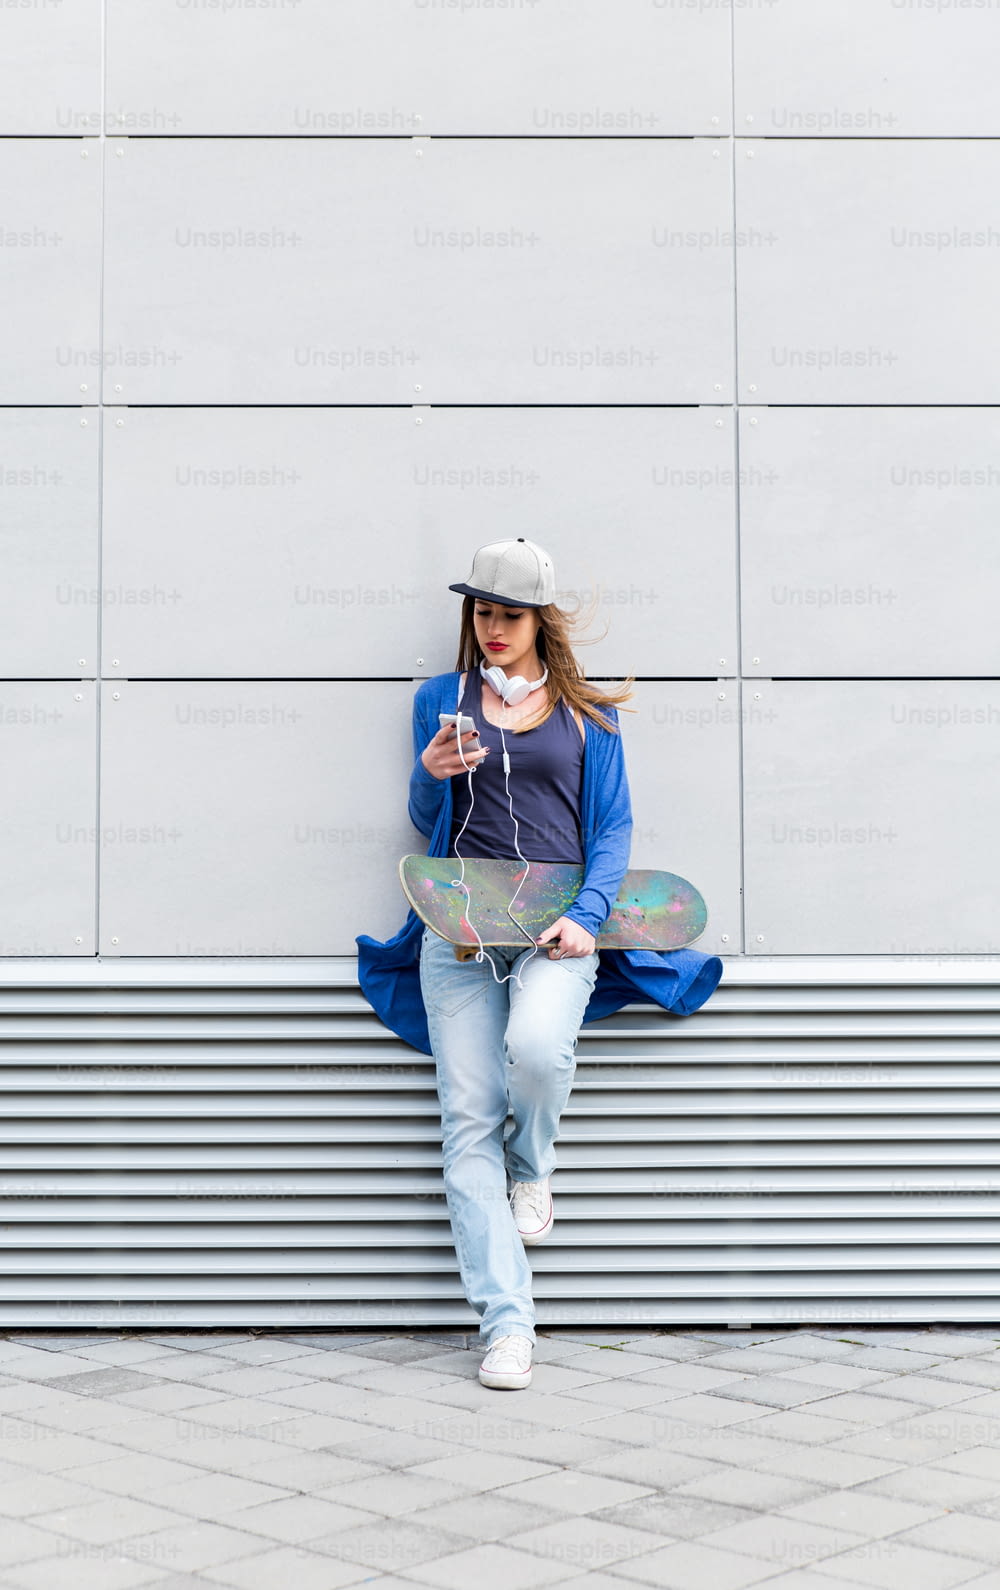 Young girl with skateboard leaning on modern gray wall, she is holding a mobile phone in her hand.